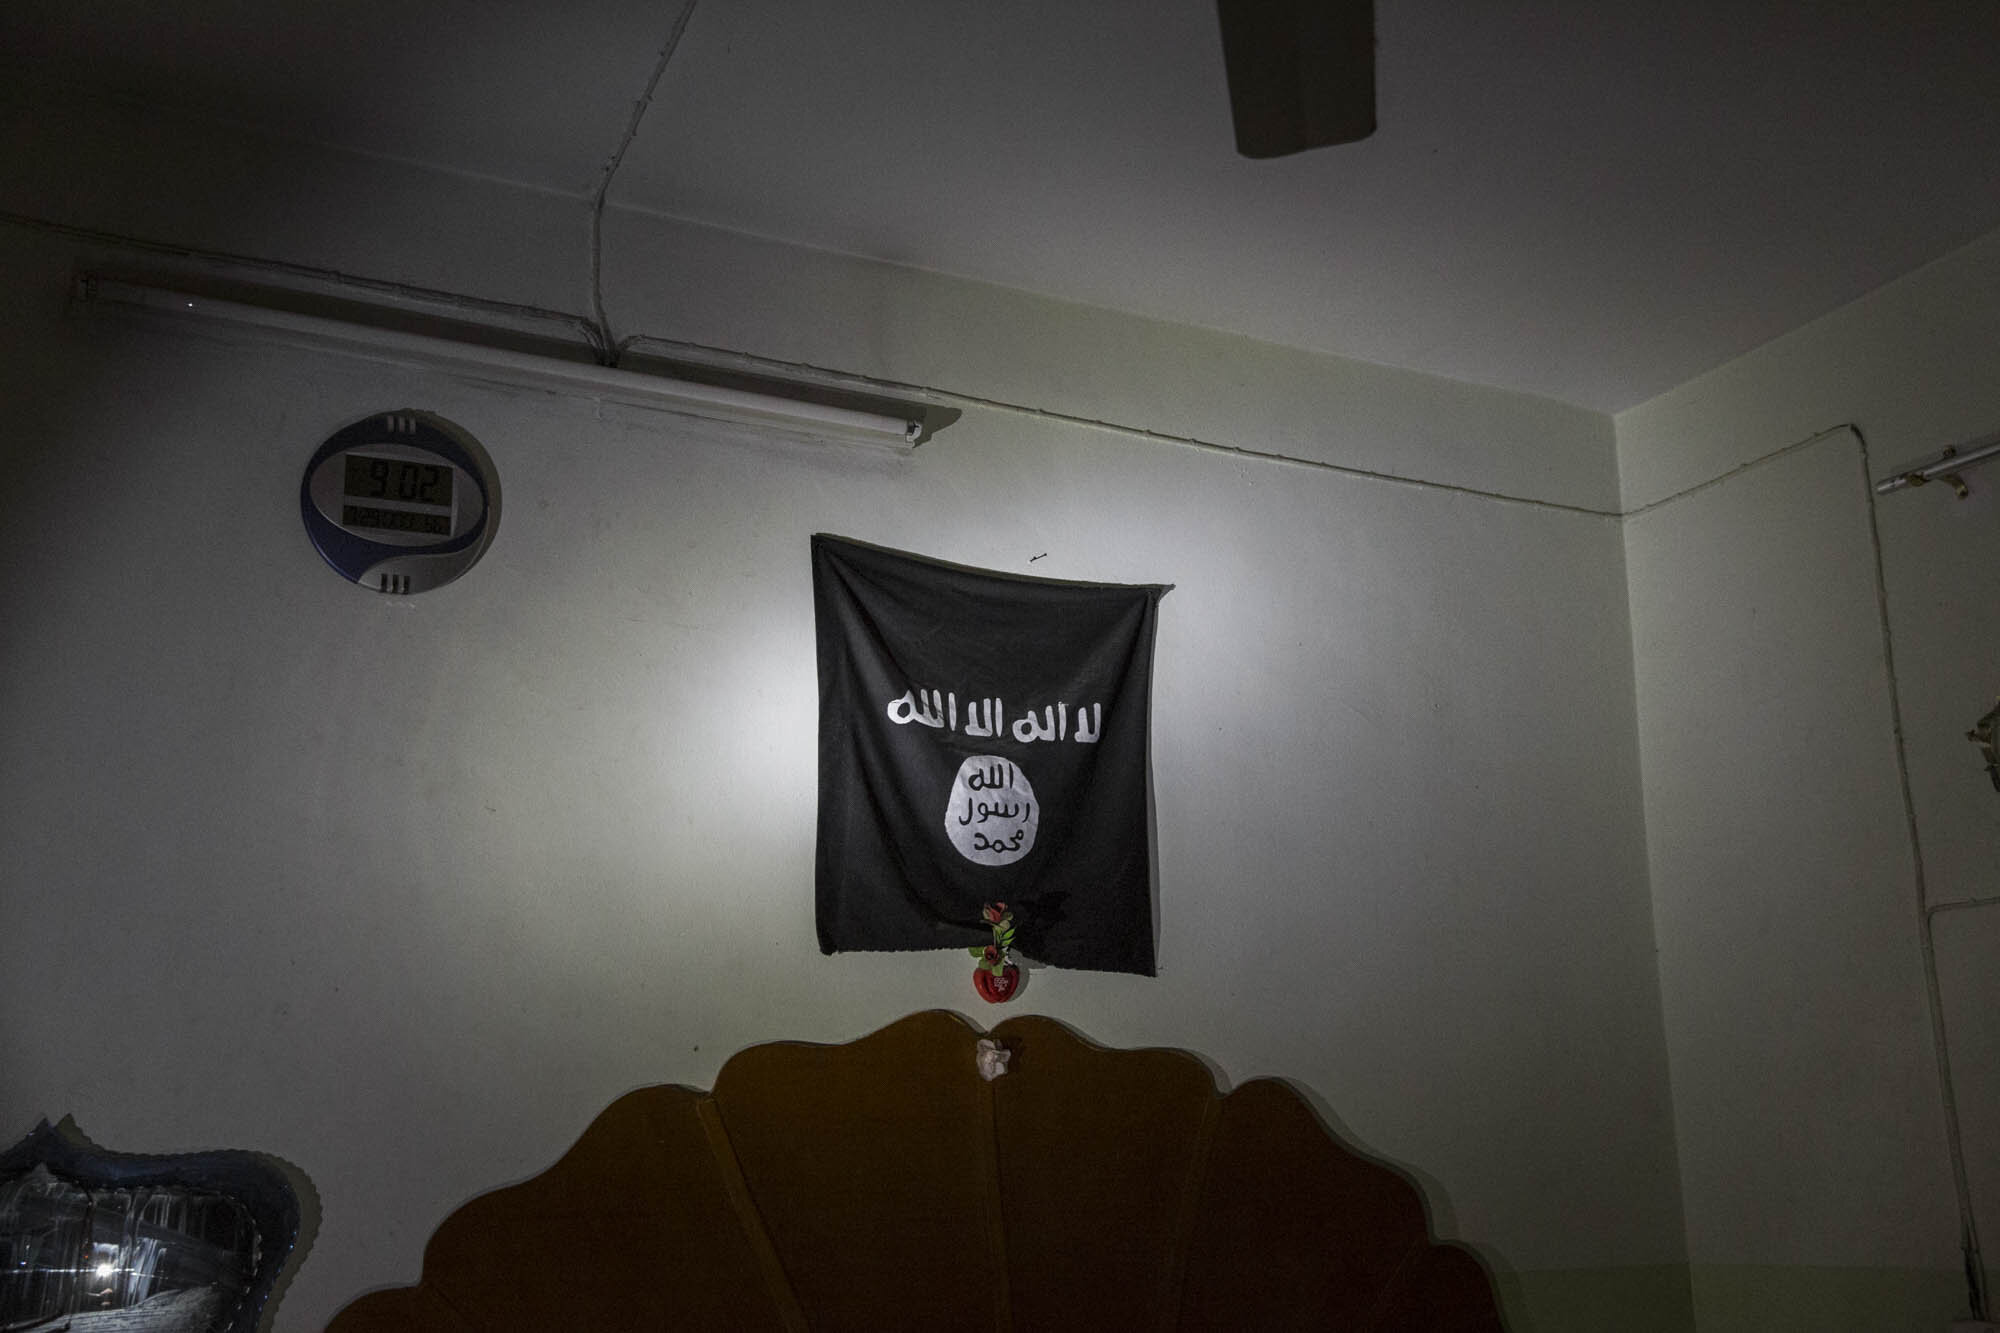  An ISIS flag was found hanging above a bed in a house used by militants up until the day before in the Shuhada neighbourhood of west Mosul. Iraq - March 2017 